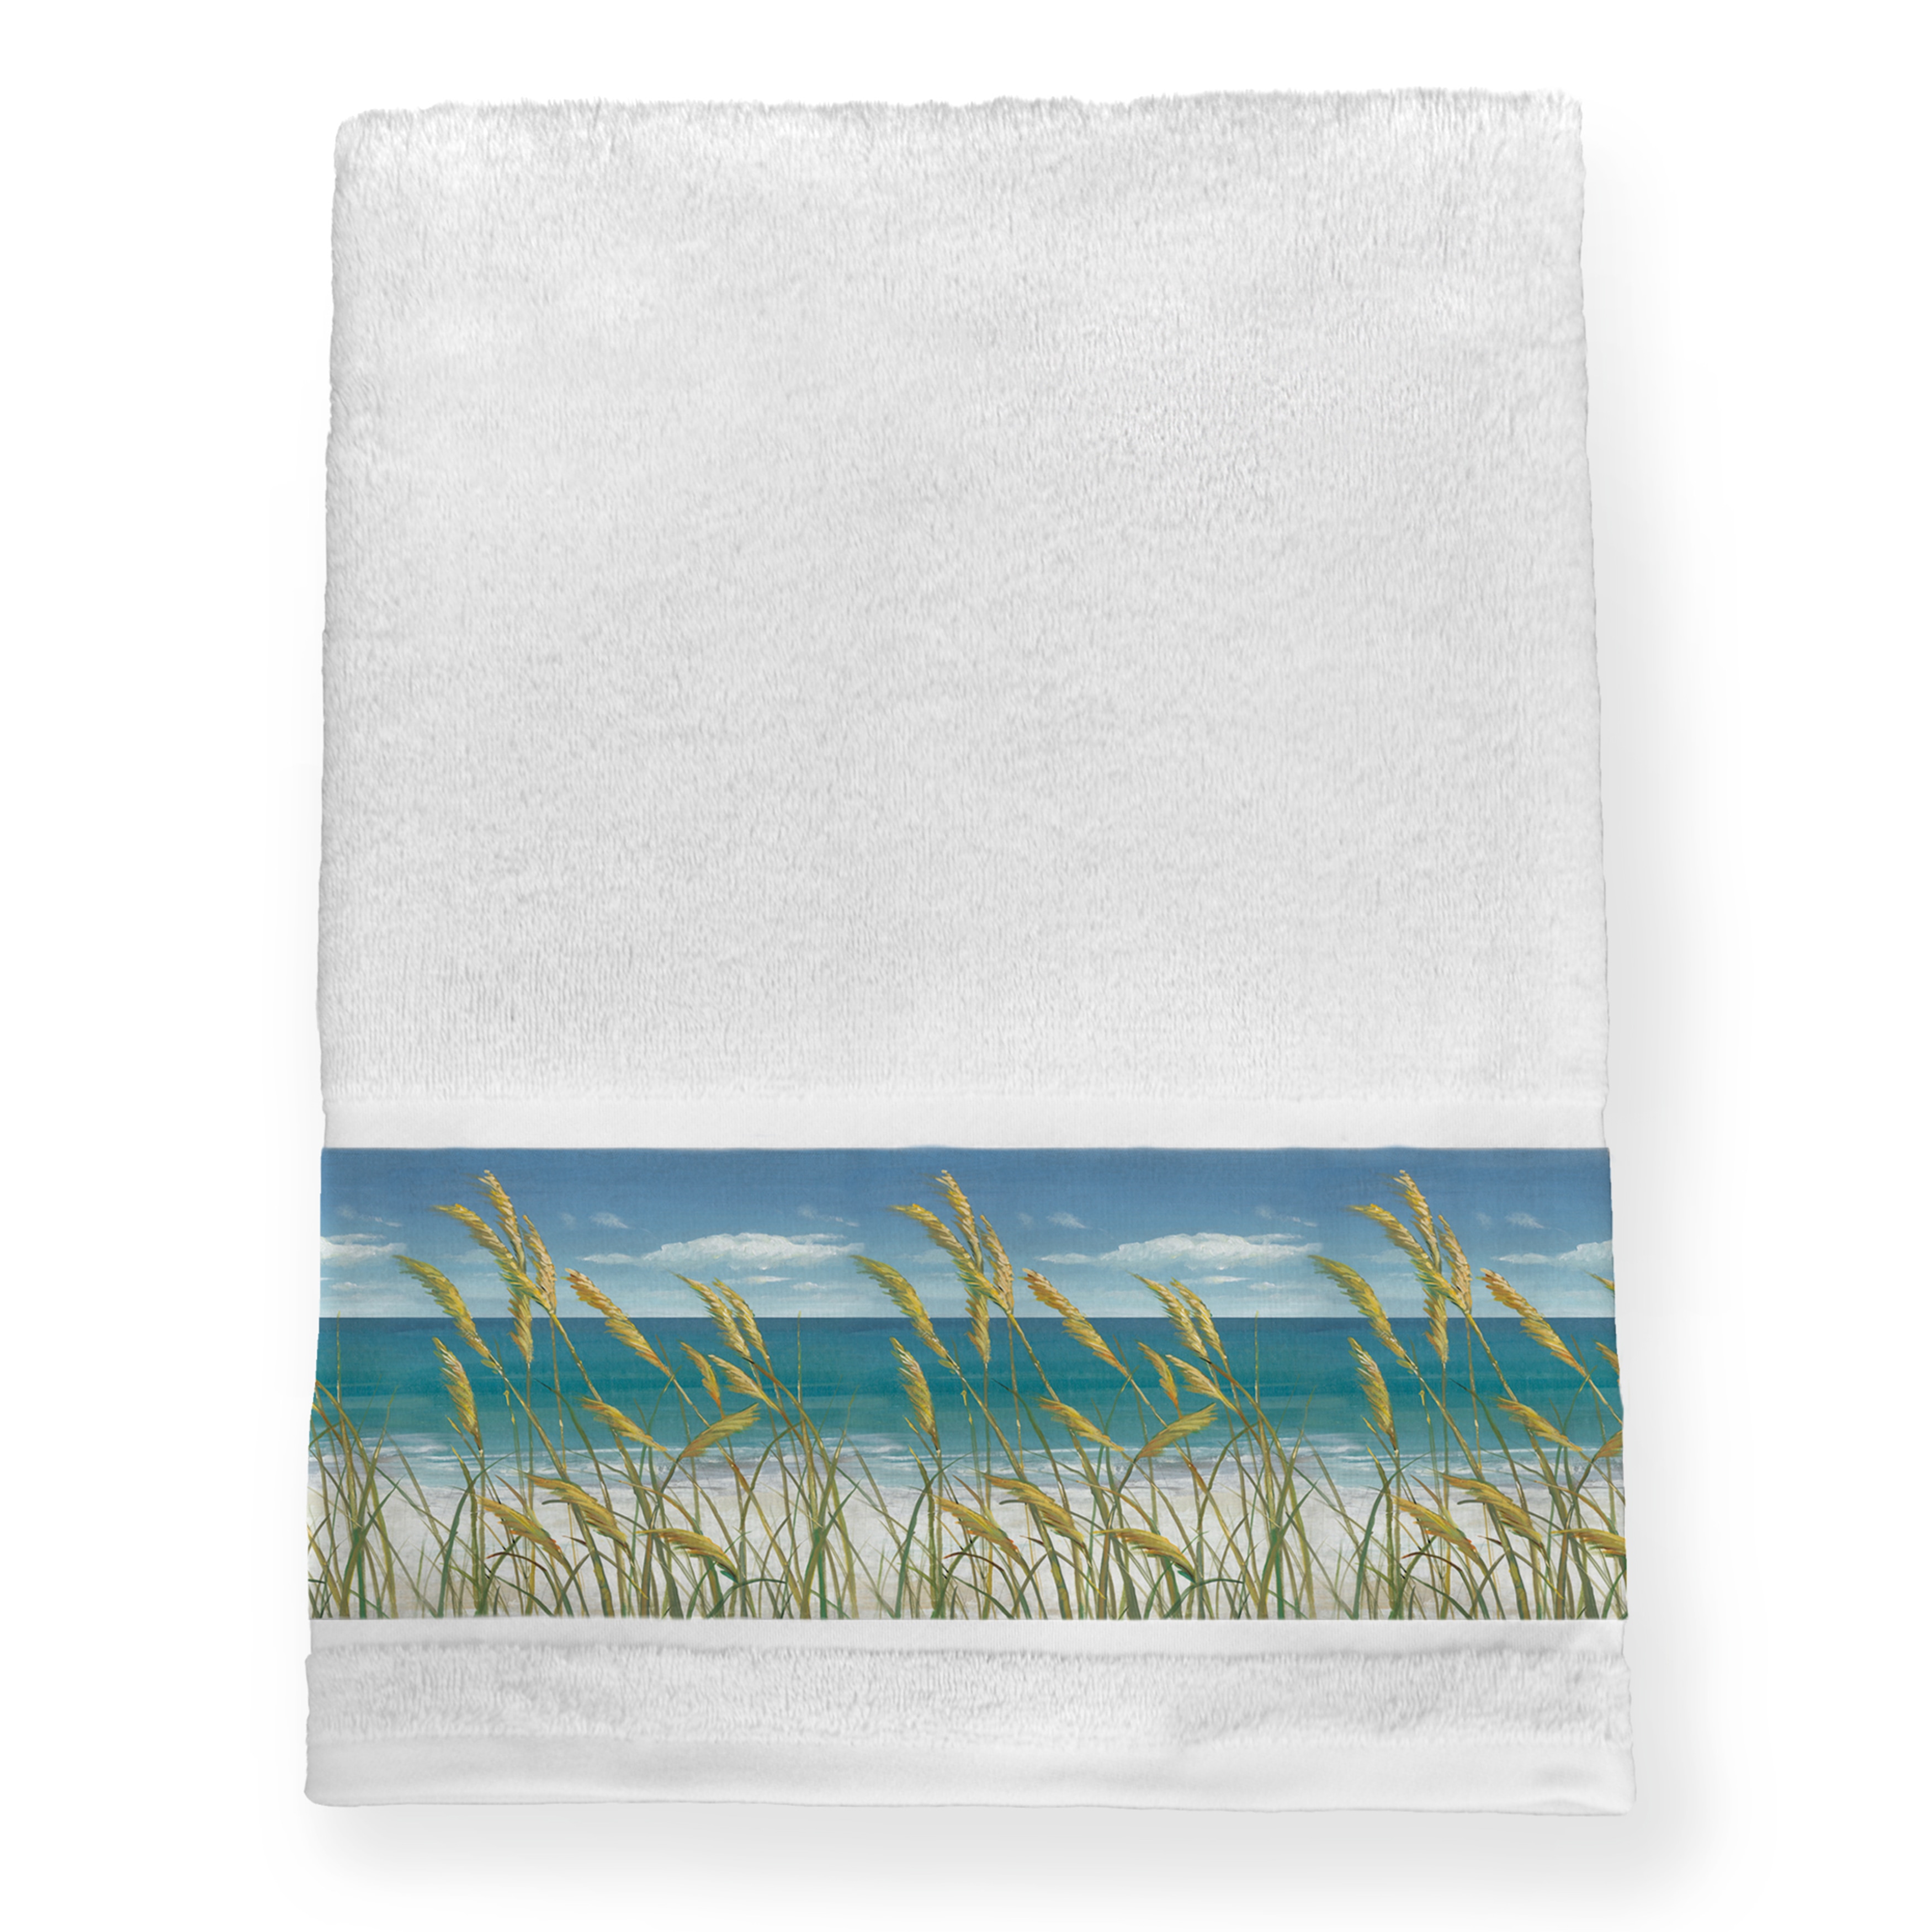 https://ak1.ostkcdn.com/images/products/12456537/Laural-Home-Ocean-Breeze-Bath-Towel-f8a9b095-6be8-4d25-b857-8a0ef541f537.jpg